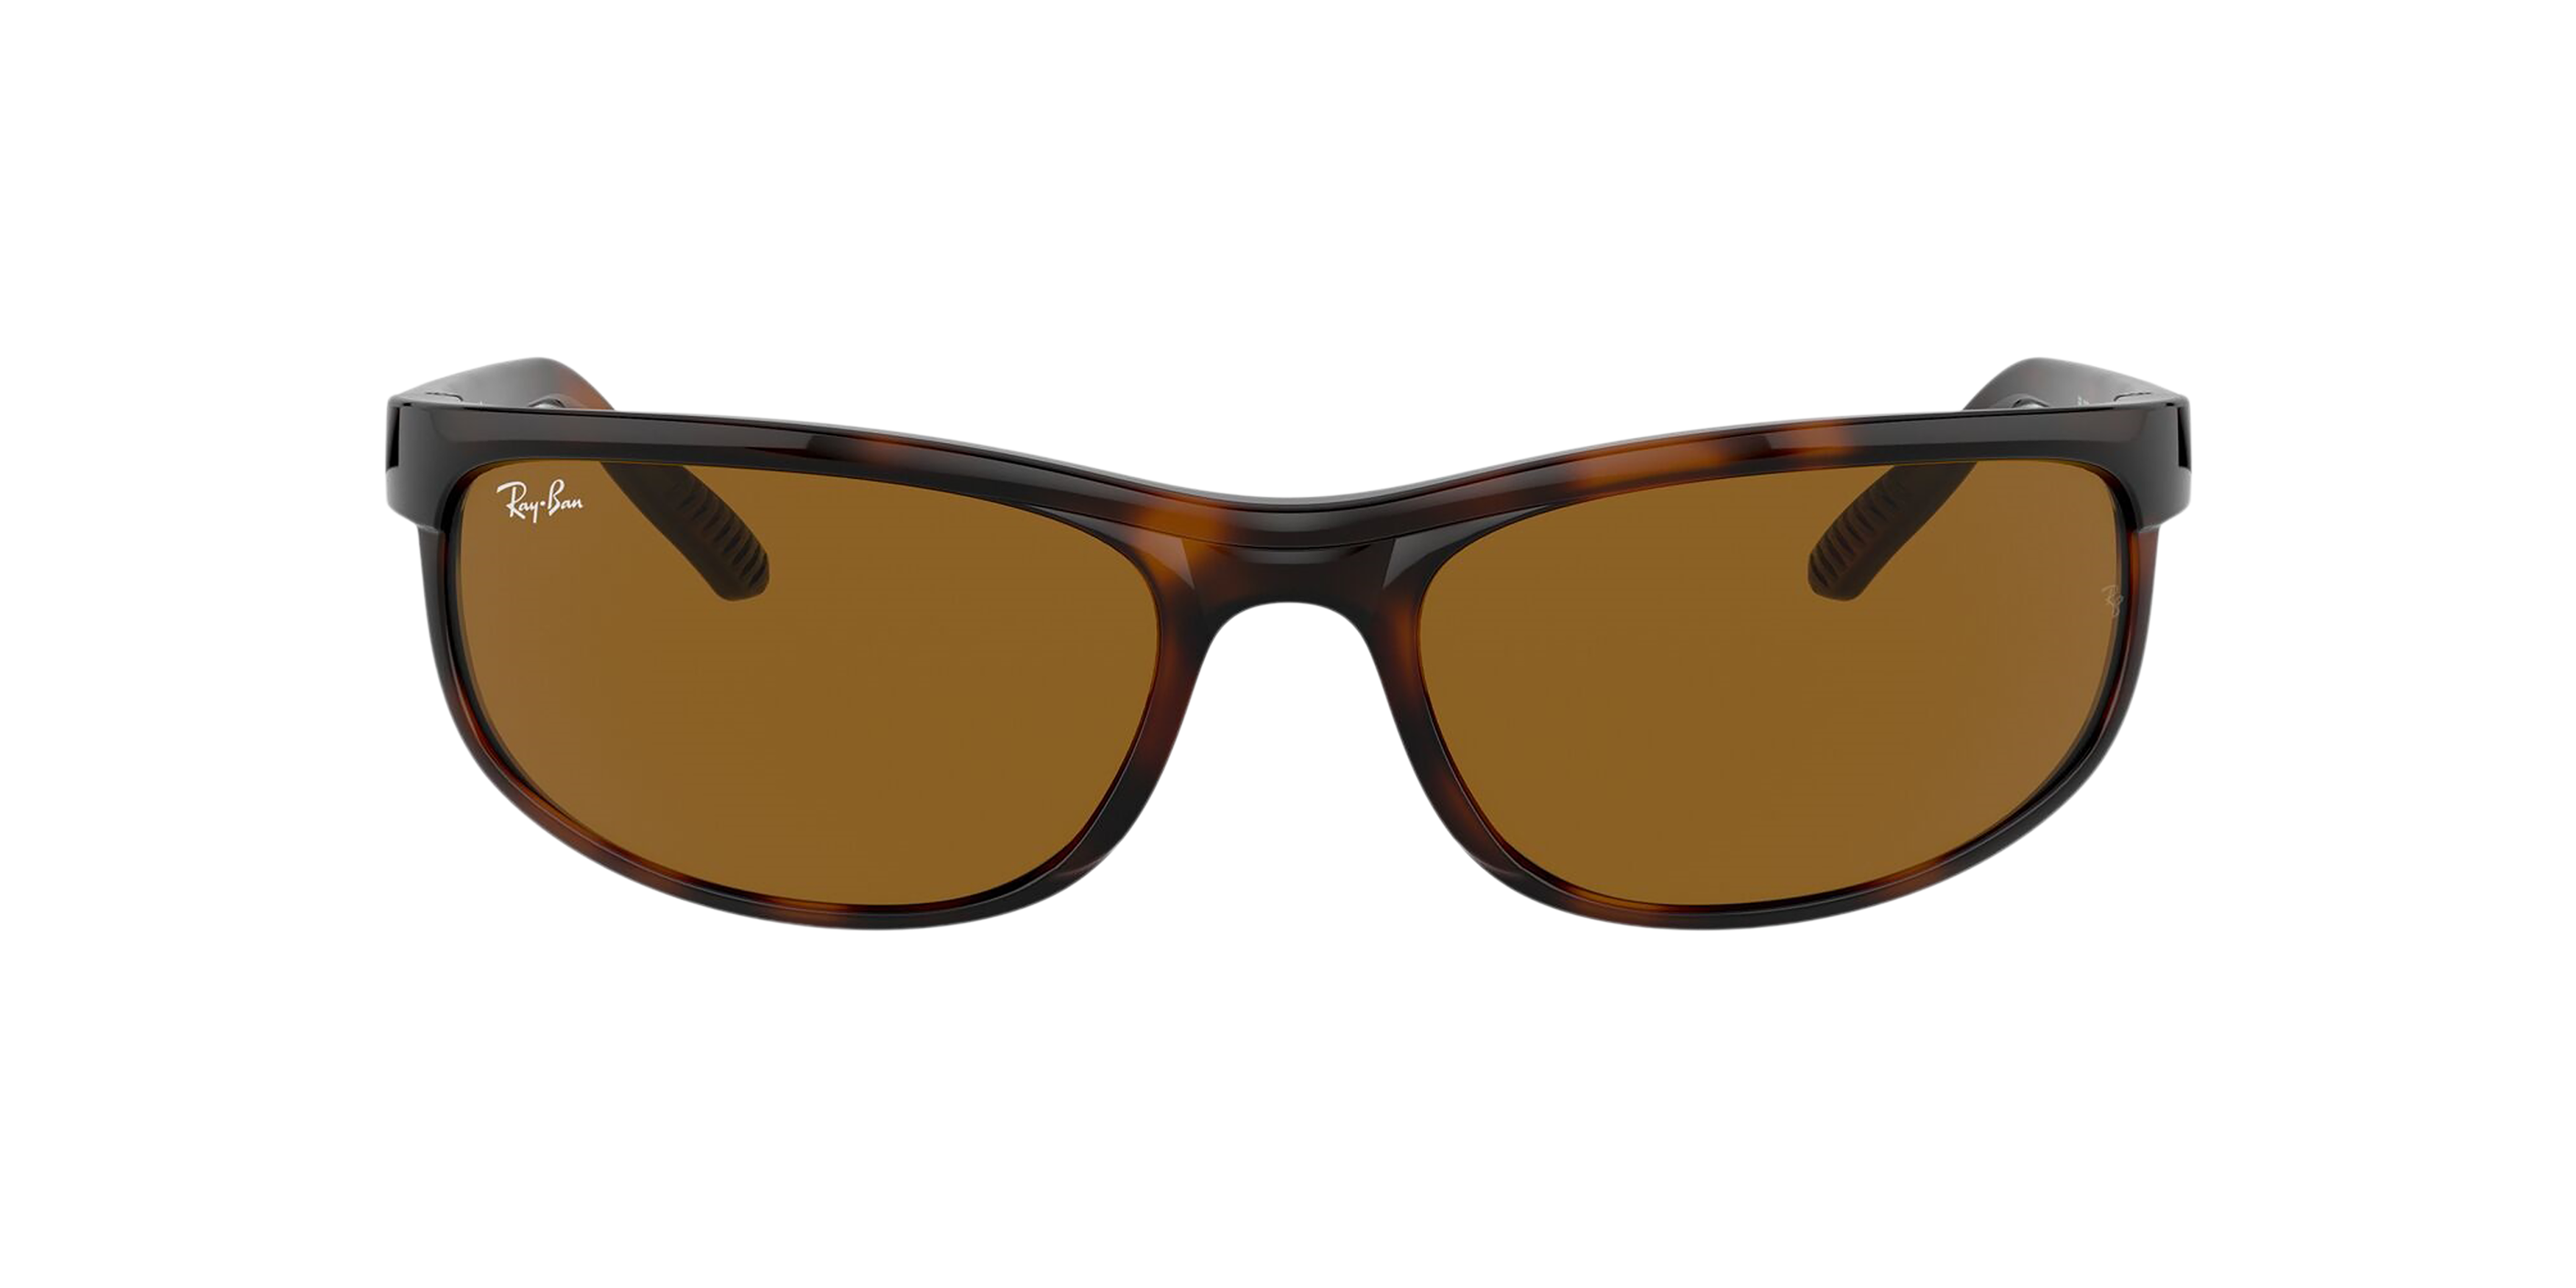 [products.image.front] Ray-Ban Predator 2 RB2027 650833